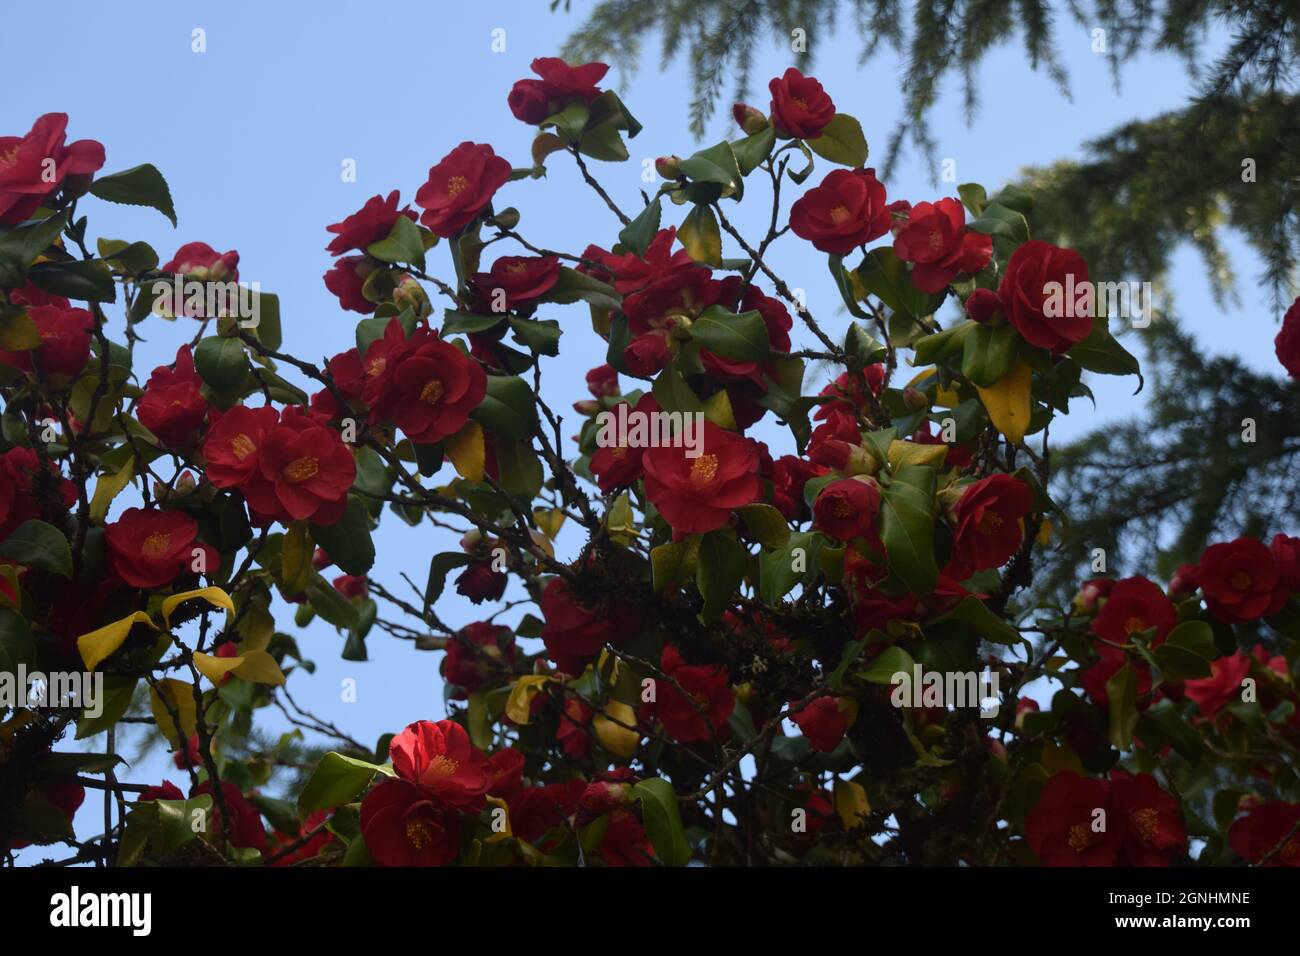 A red camellia growing in a garden in Oregon Stock Photo